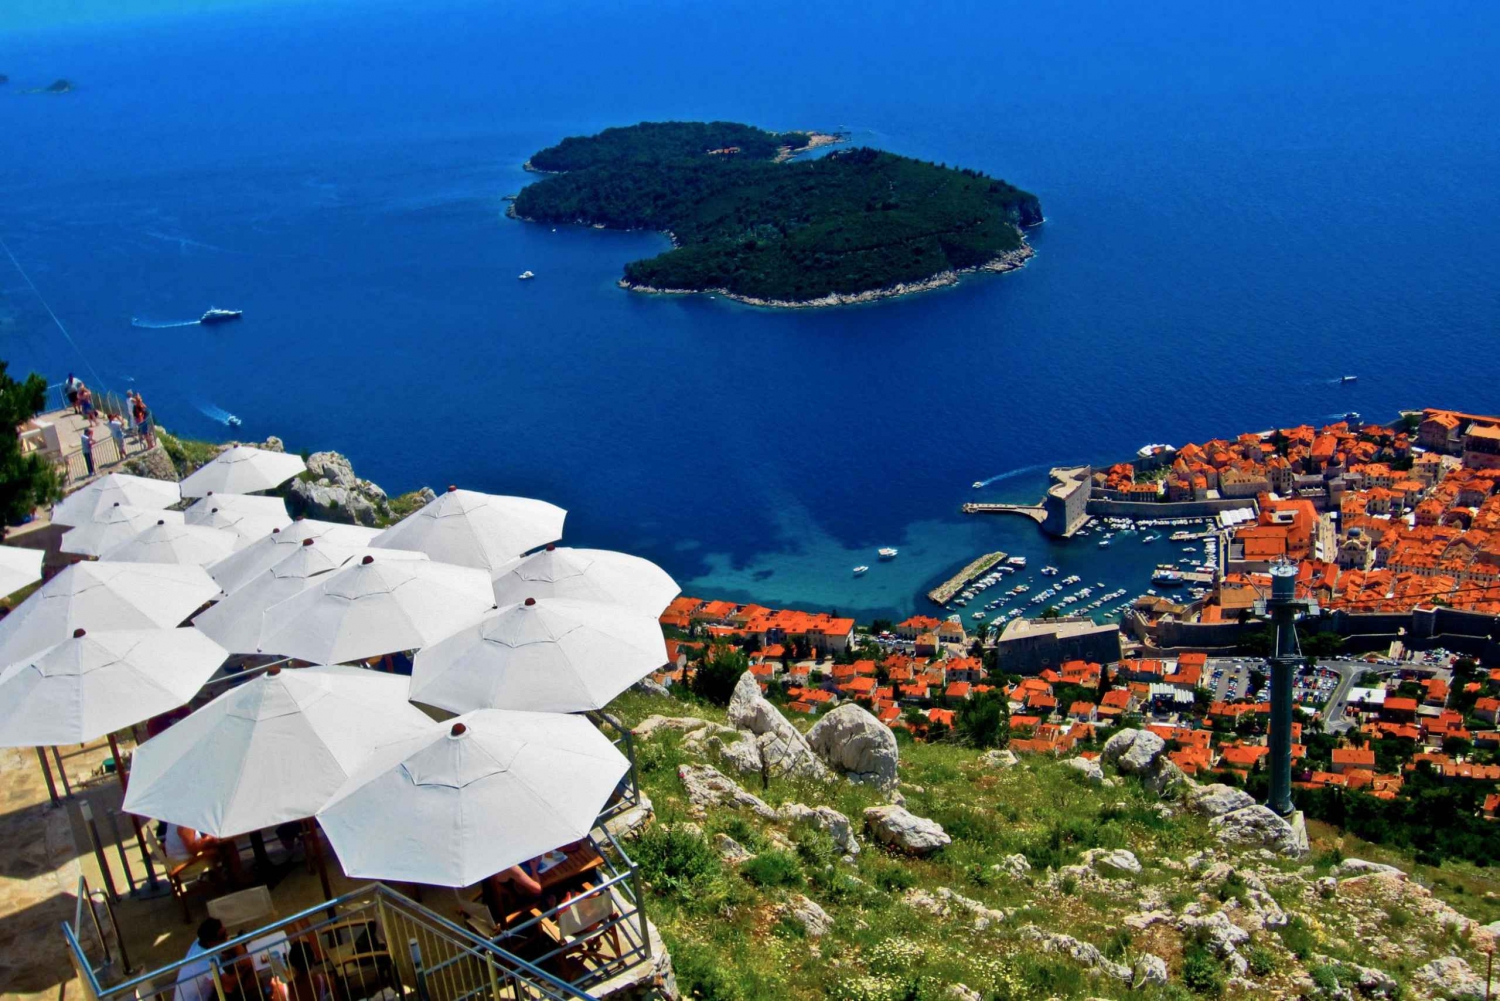 Dubrovnik Old Town Discovery: Cable Car and Walking Tour